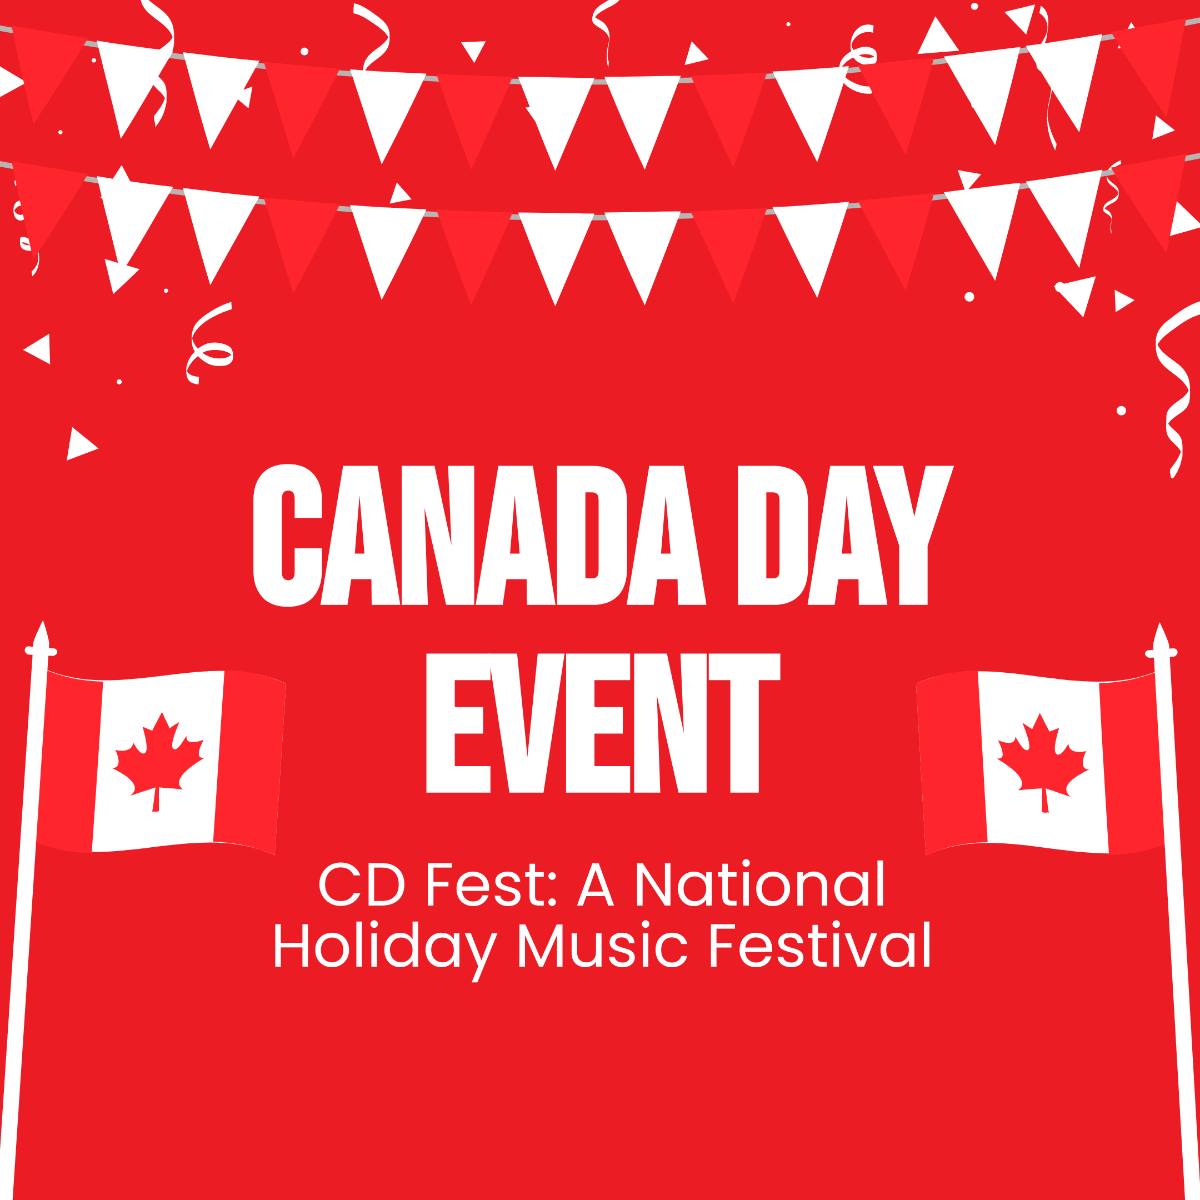 Canada Day Event Instagram Post Template